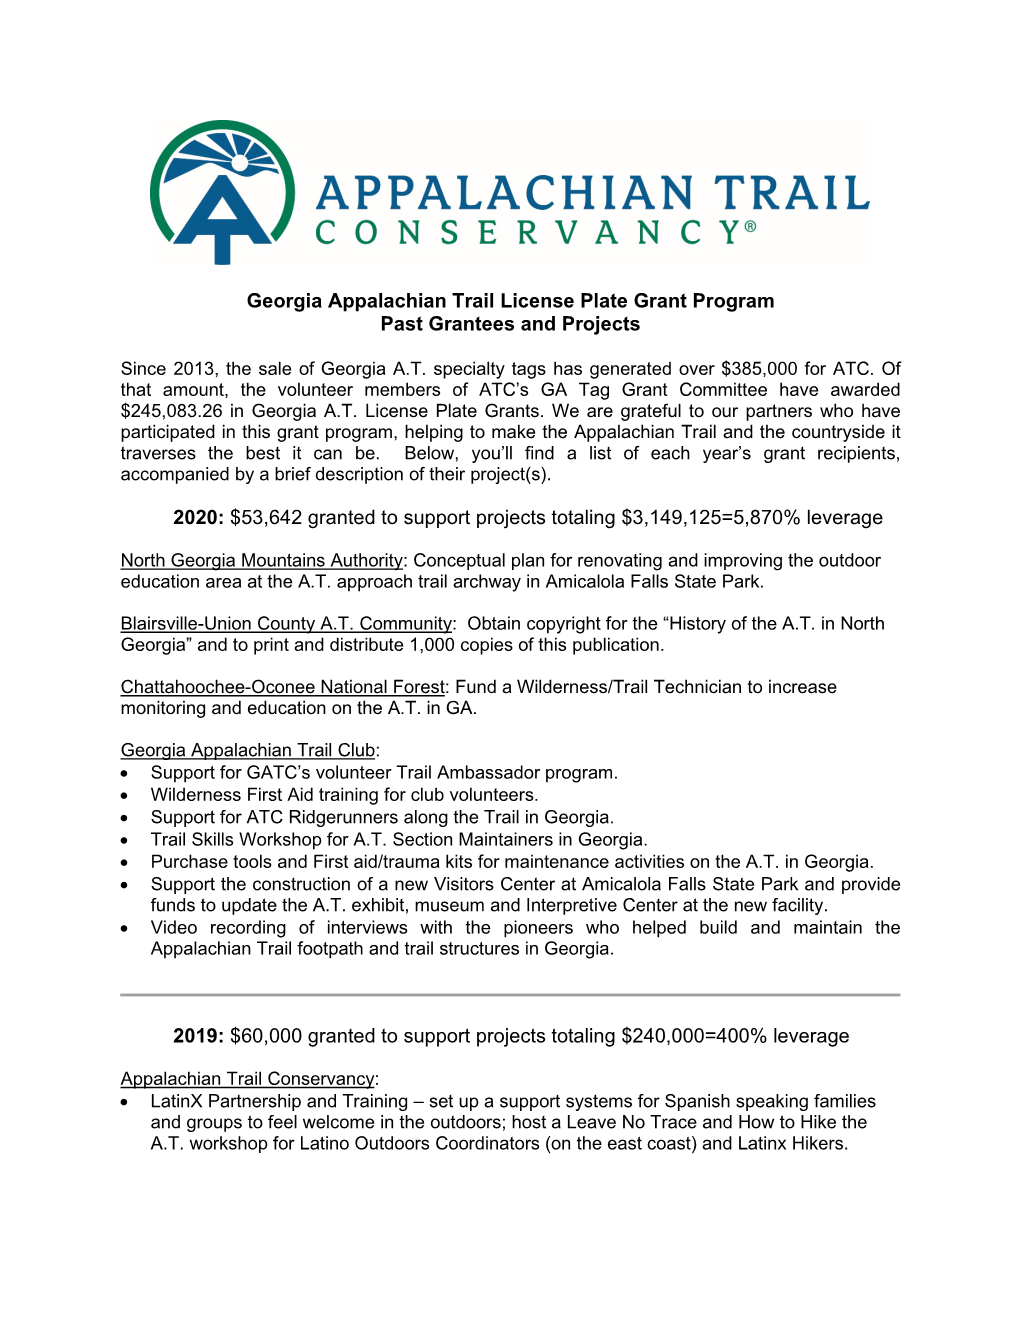 Georgia Appalachian Trail License Plate Grant Program Past Grantees and Projects